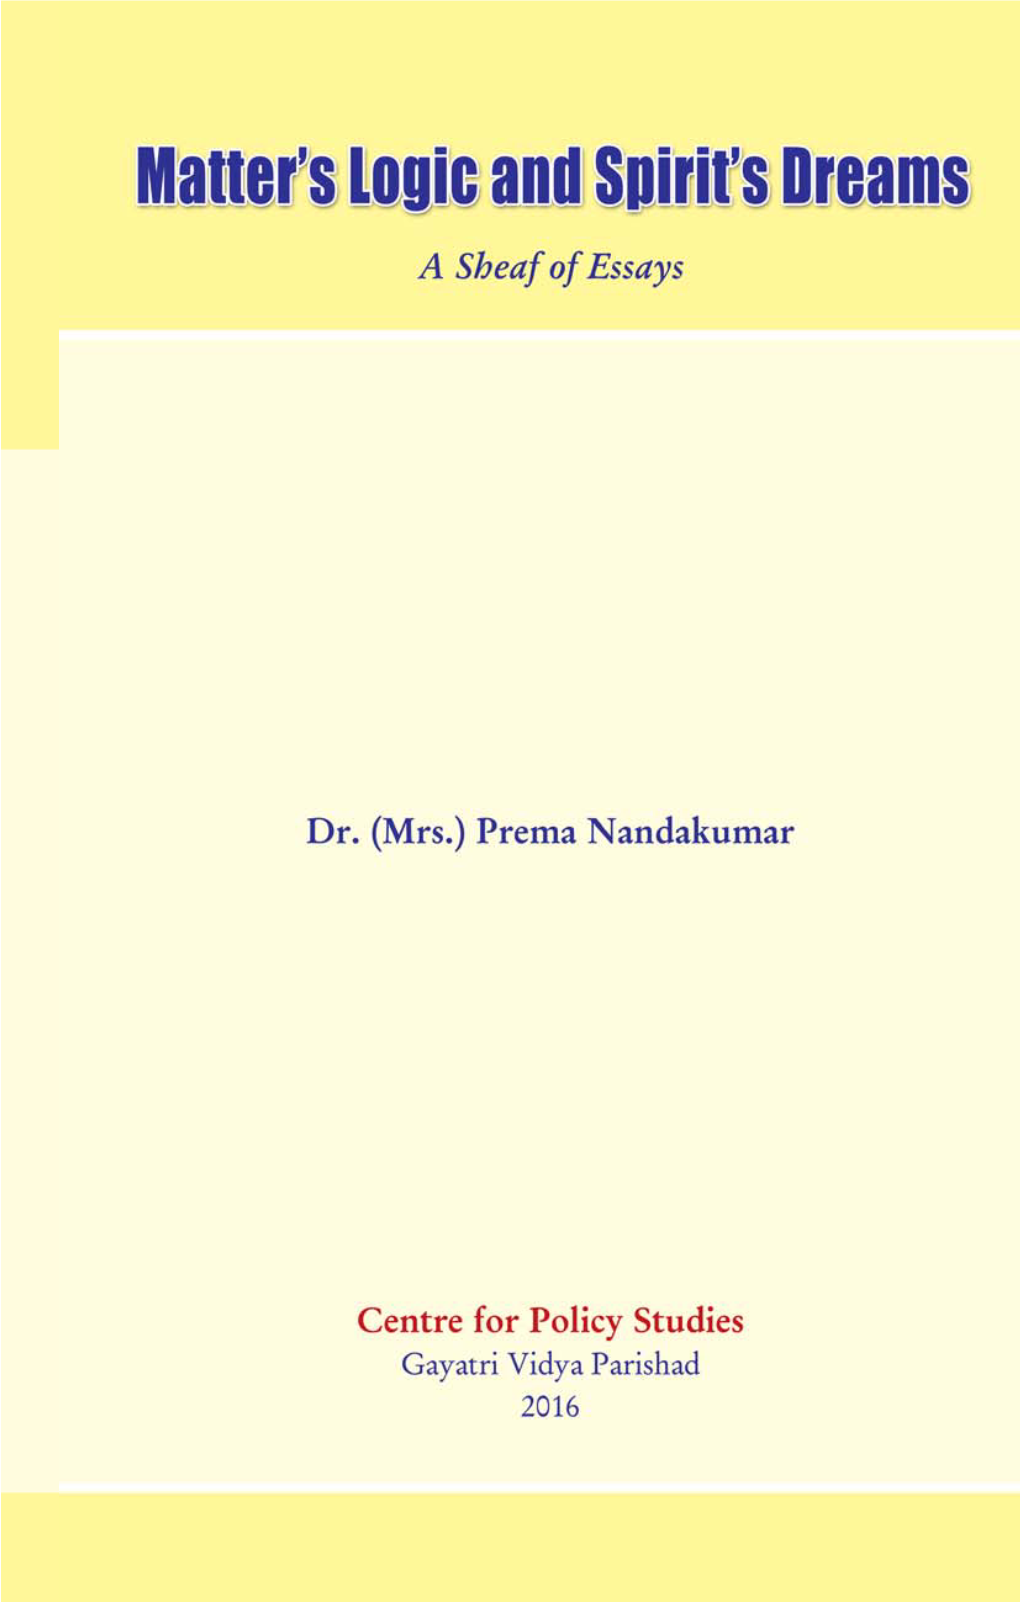 Grateful Thanks to Prema Nandakumar Mrs Prema Nandakumar’S First Article for the Bulletin of Centre for Policy Studies Was Published in 1999